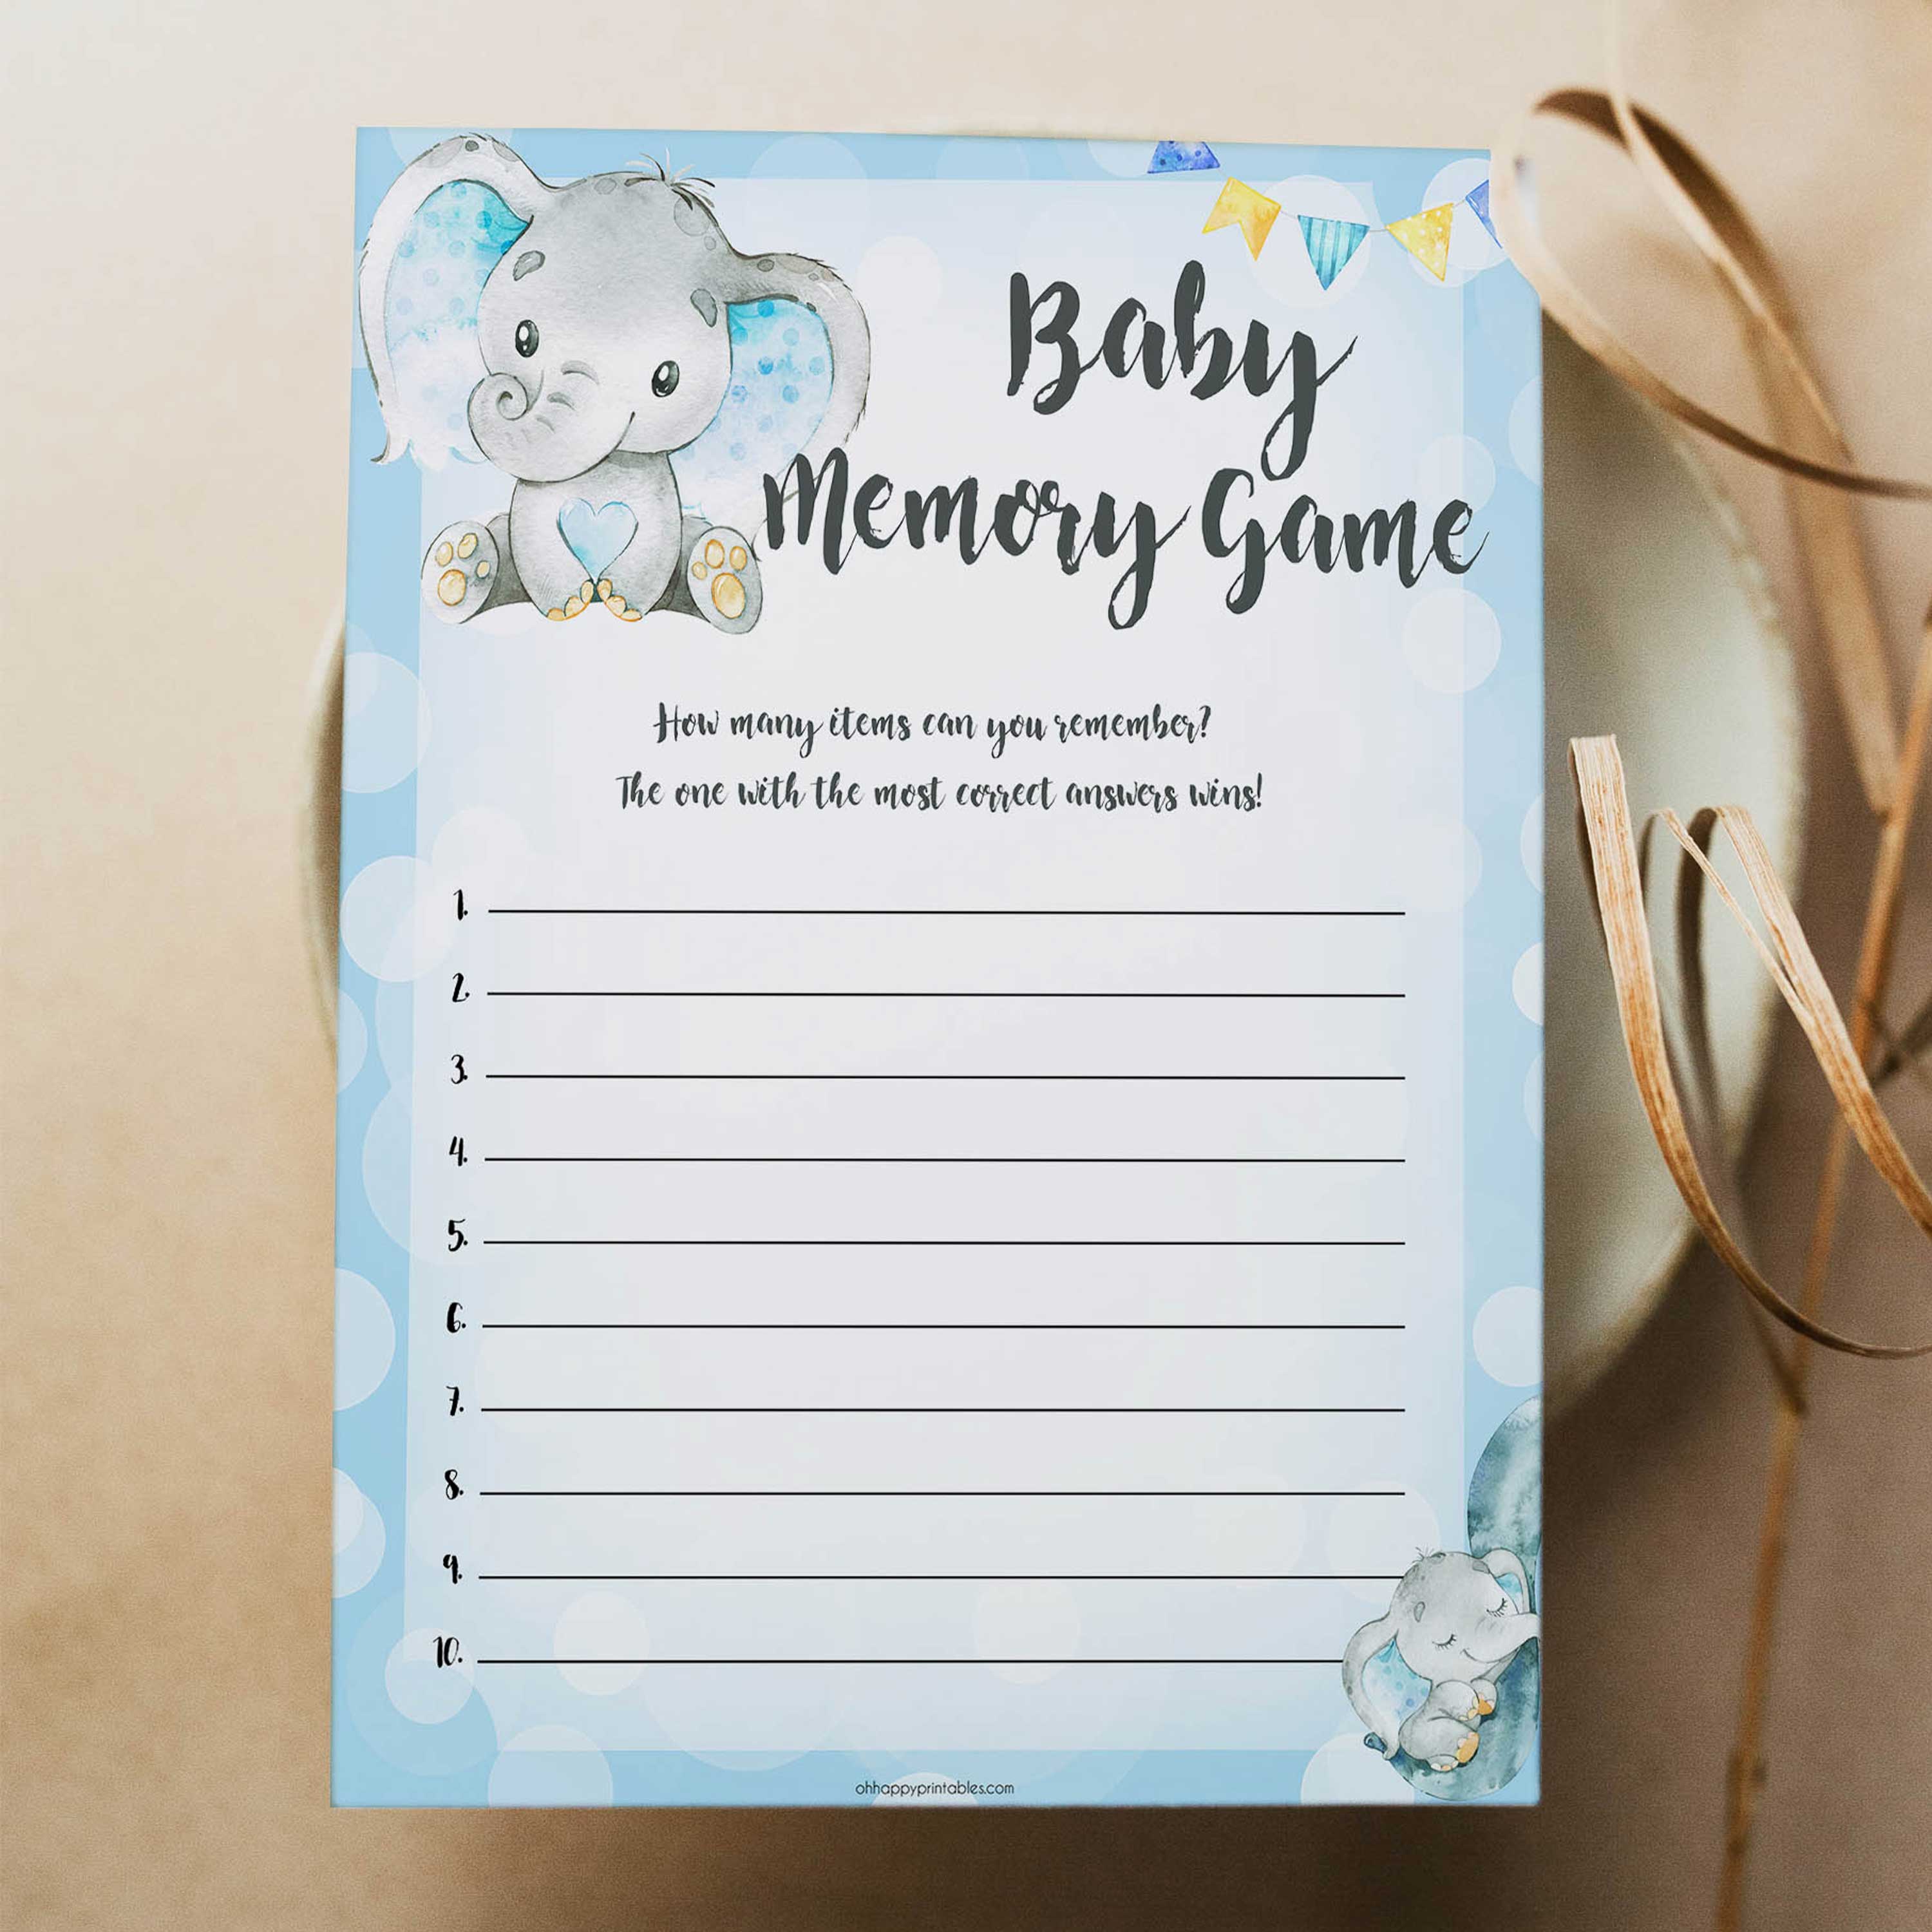 Blue elephant baby games, baby memory game, elephant baby games, printable baby games, top baby games, best baby shower games, baby shower ideas, fun baby games, elephant baby shower